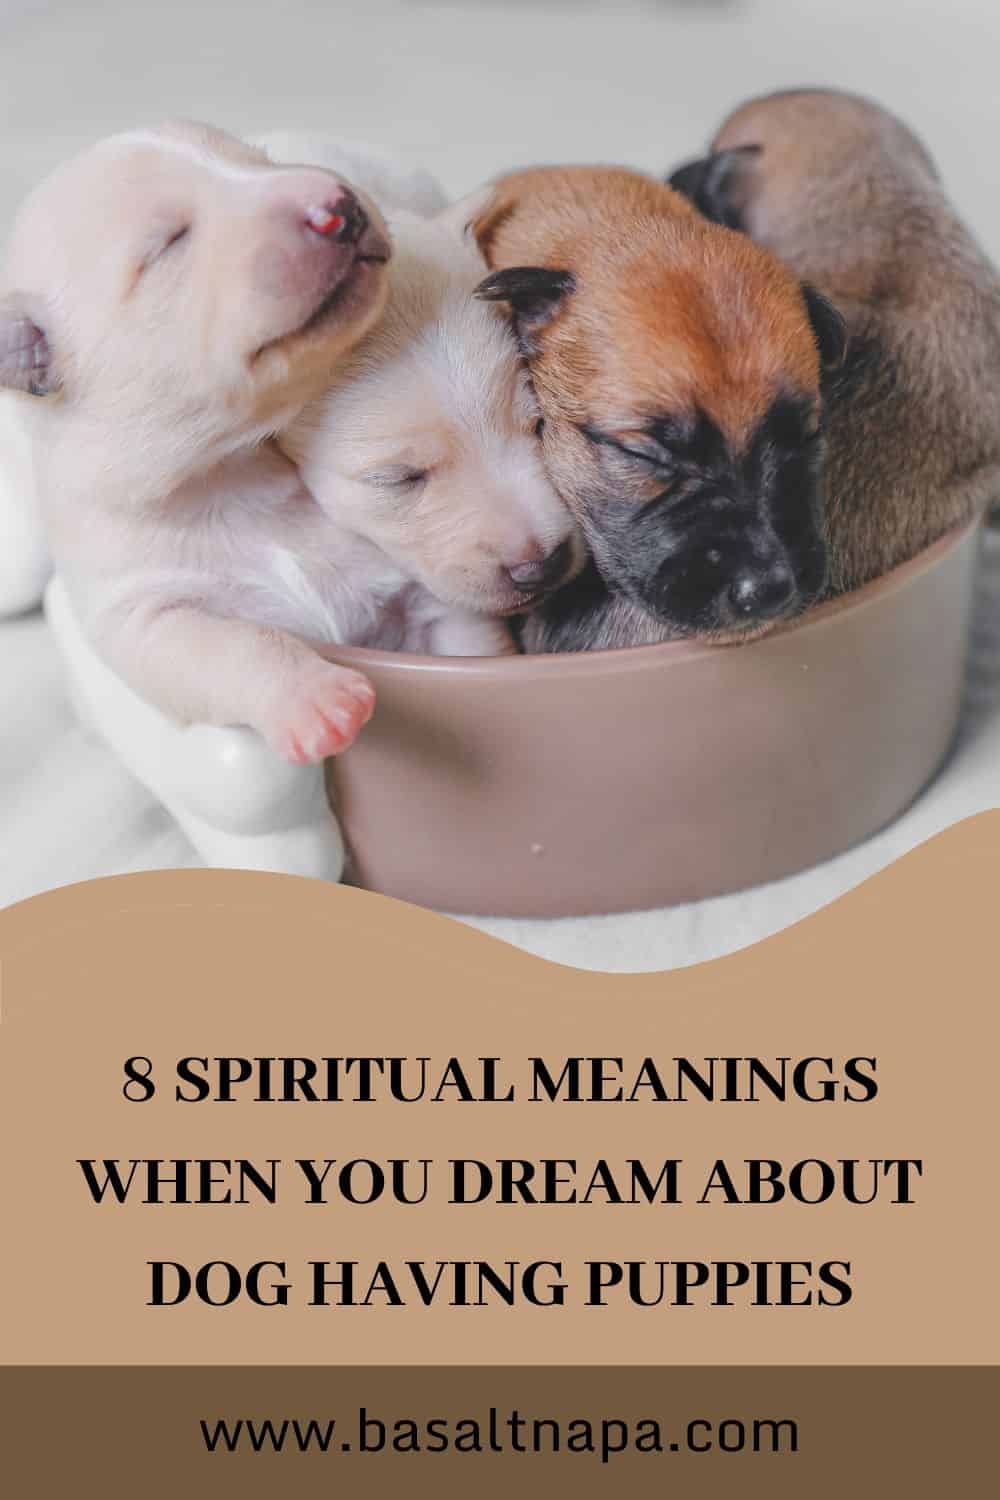 8 Spiritual Meanings When You Dream About Dog Having Puppies